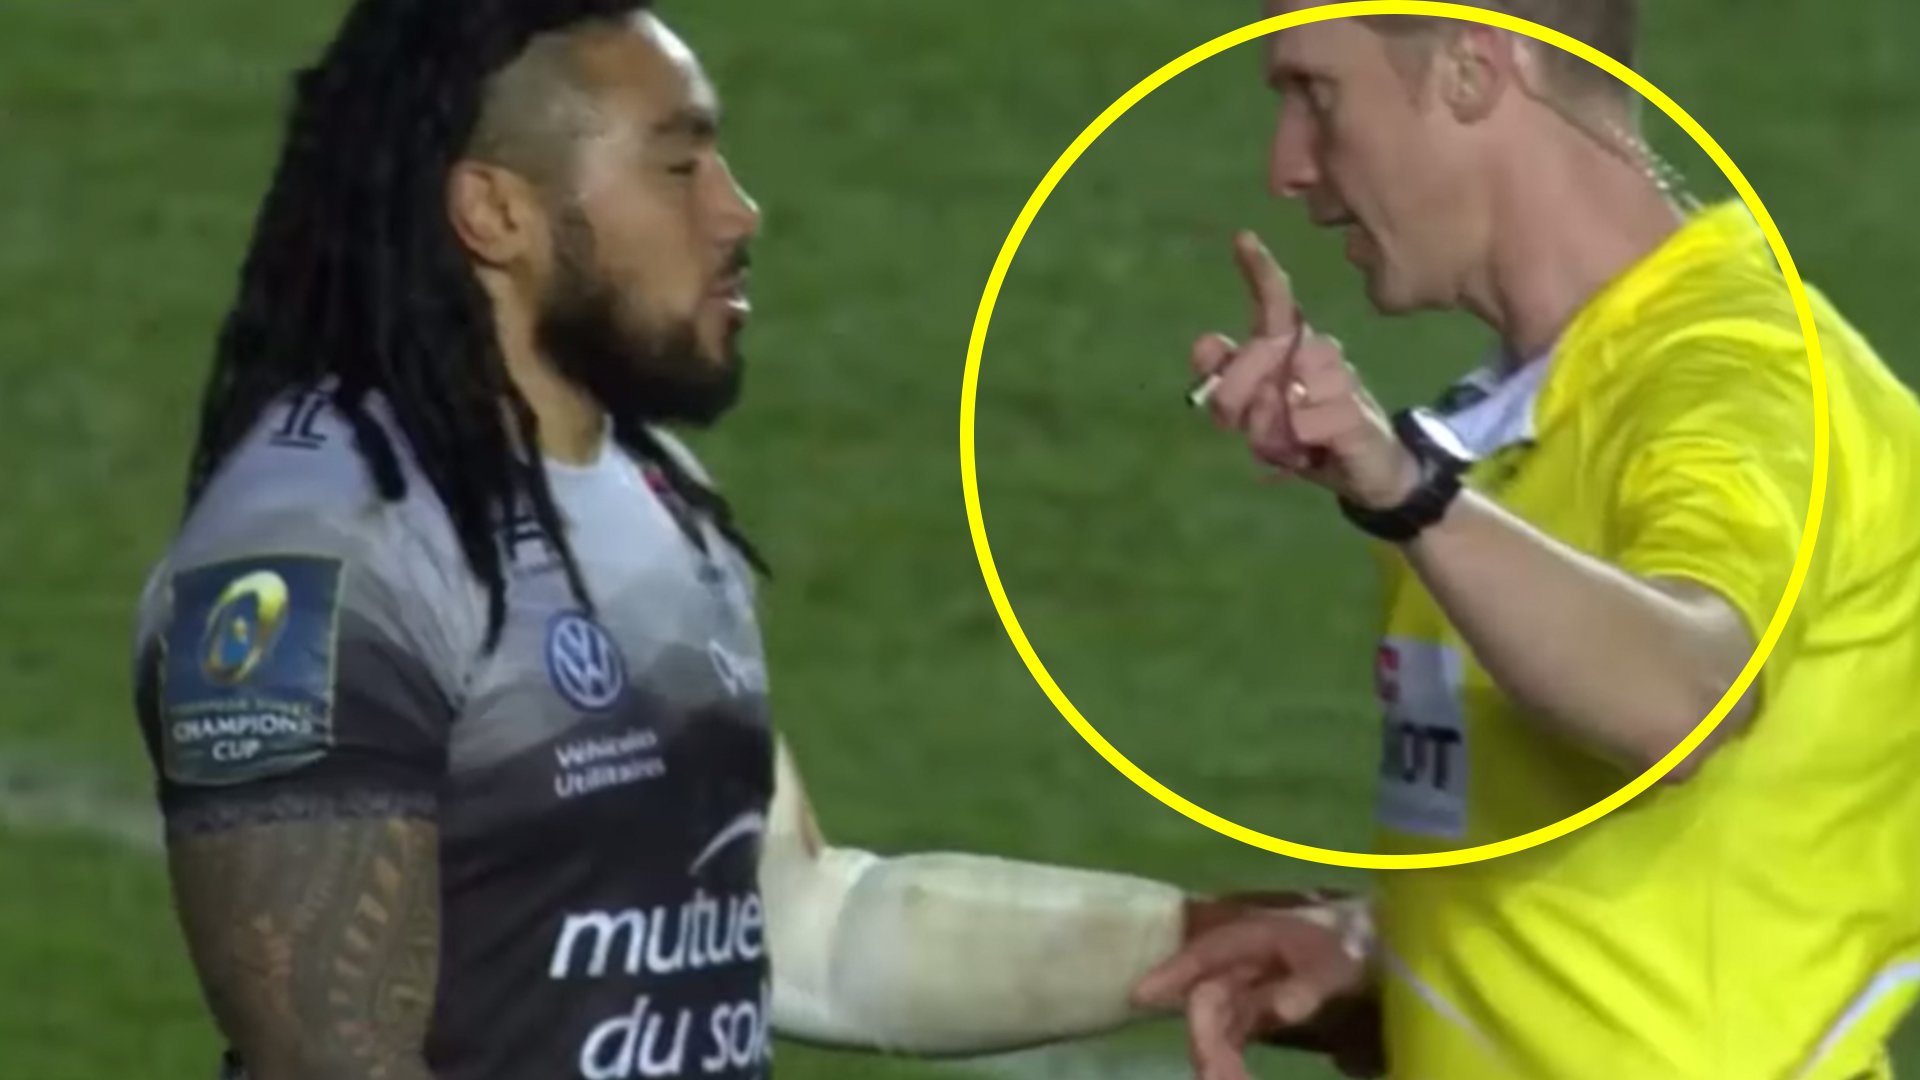 Sports fans amazed at new video revealing the amount of respect that rugby referees command